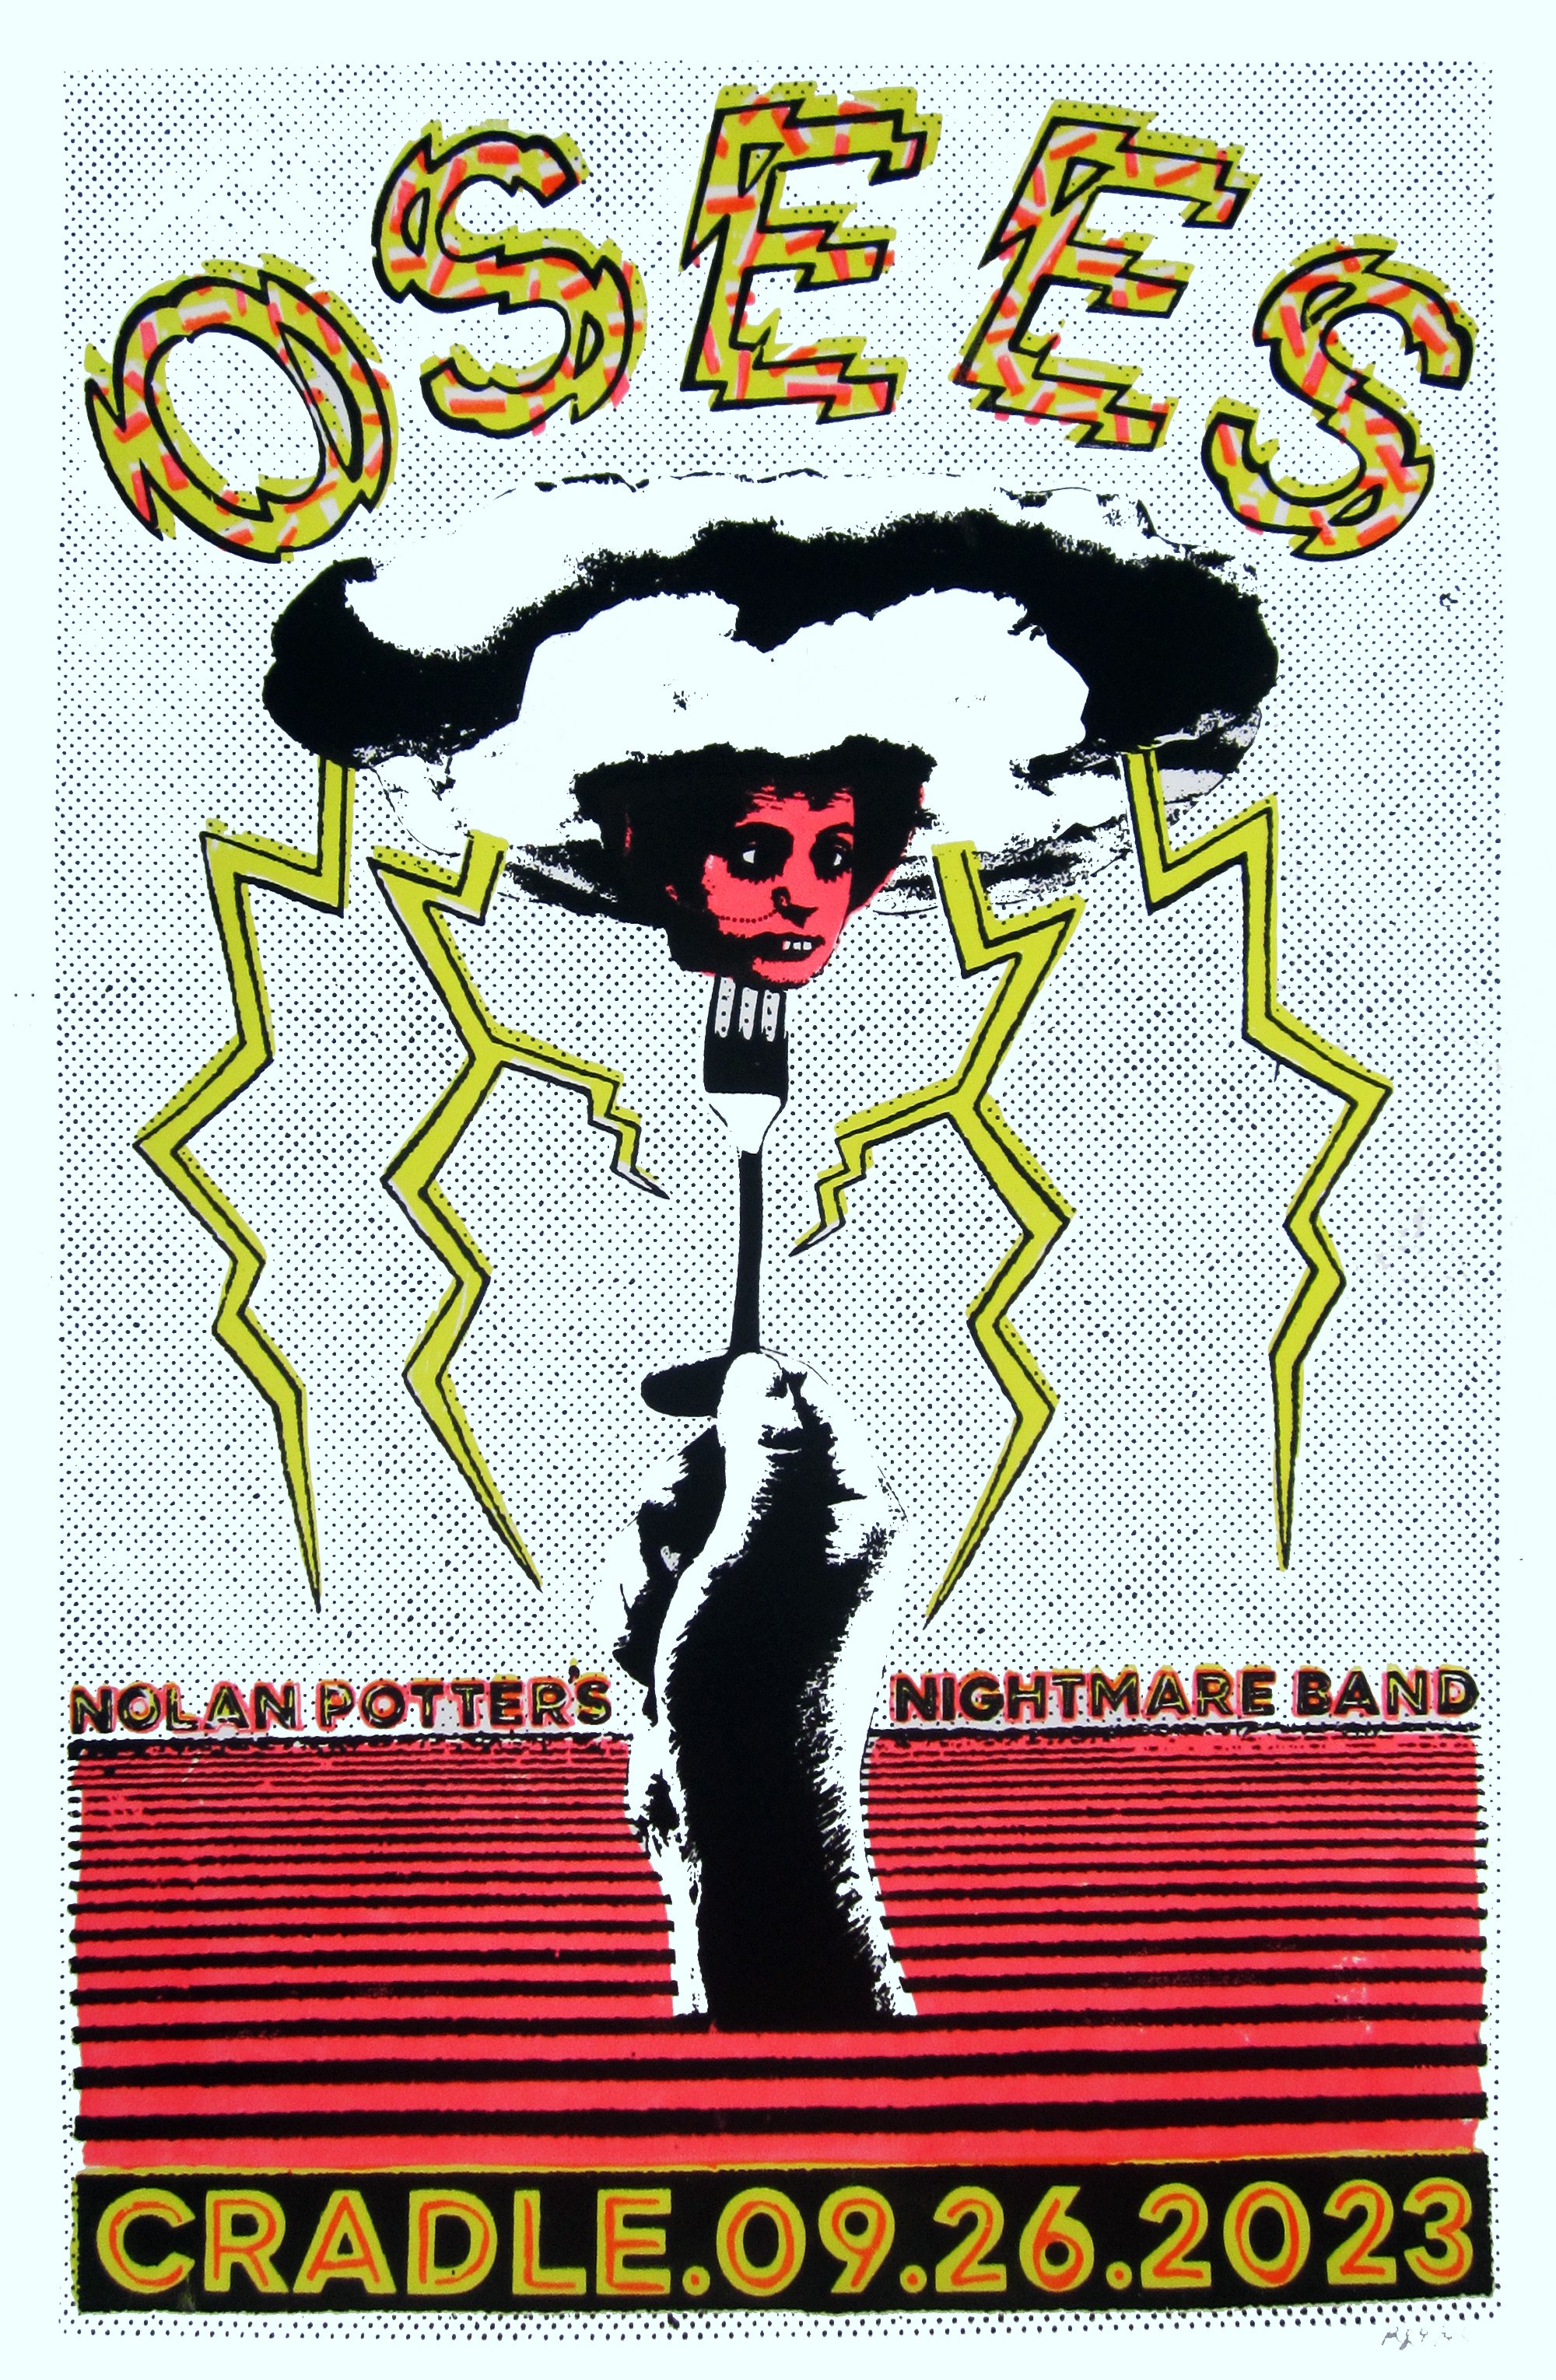 OSEES - Nolan Potter's Nightmare Band 